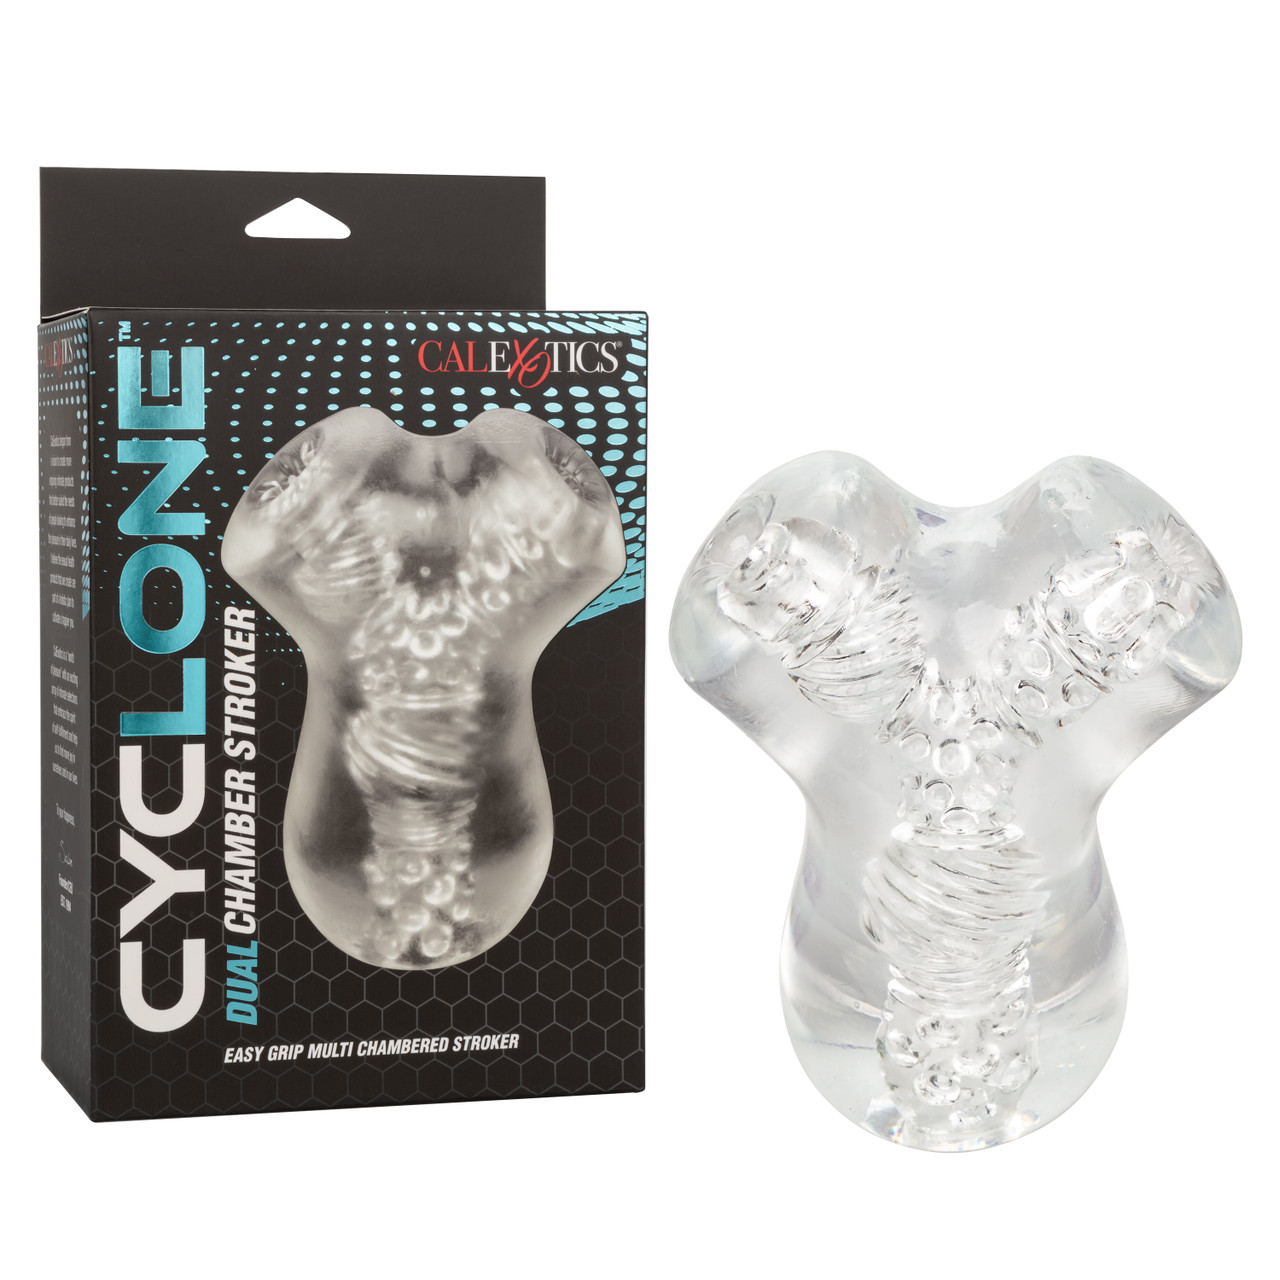 CYCLONE DUAL CHAMBER STROKER - Click Image to Close